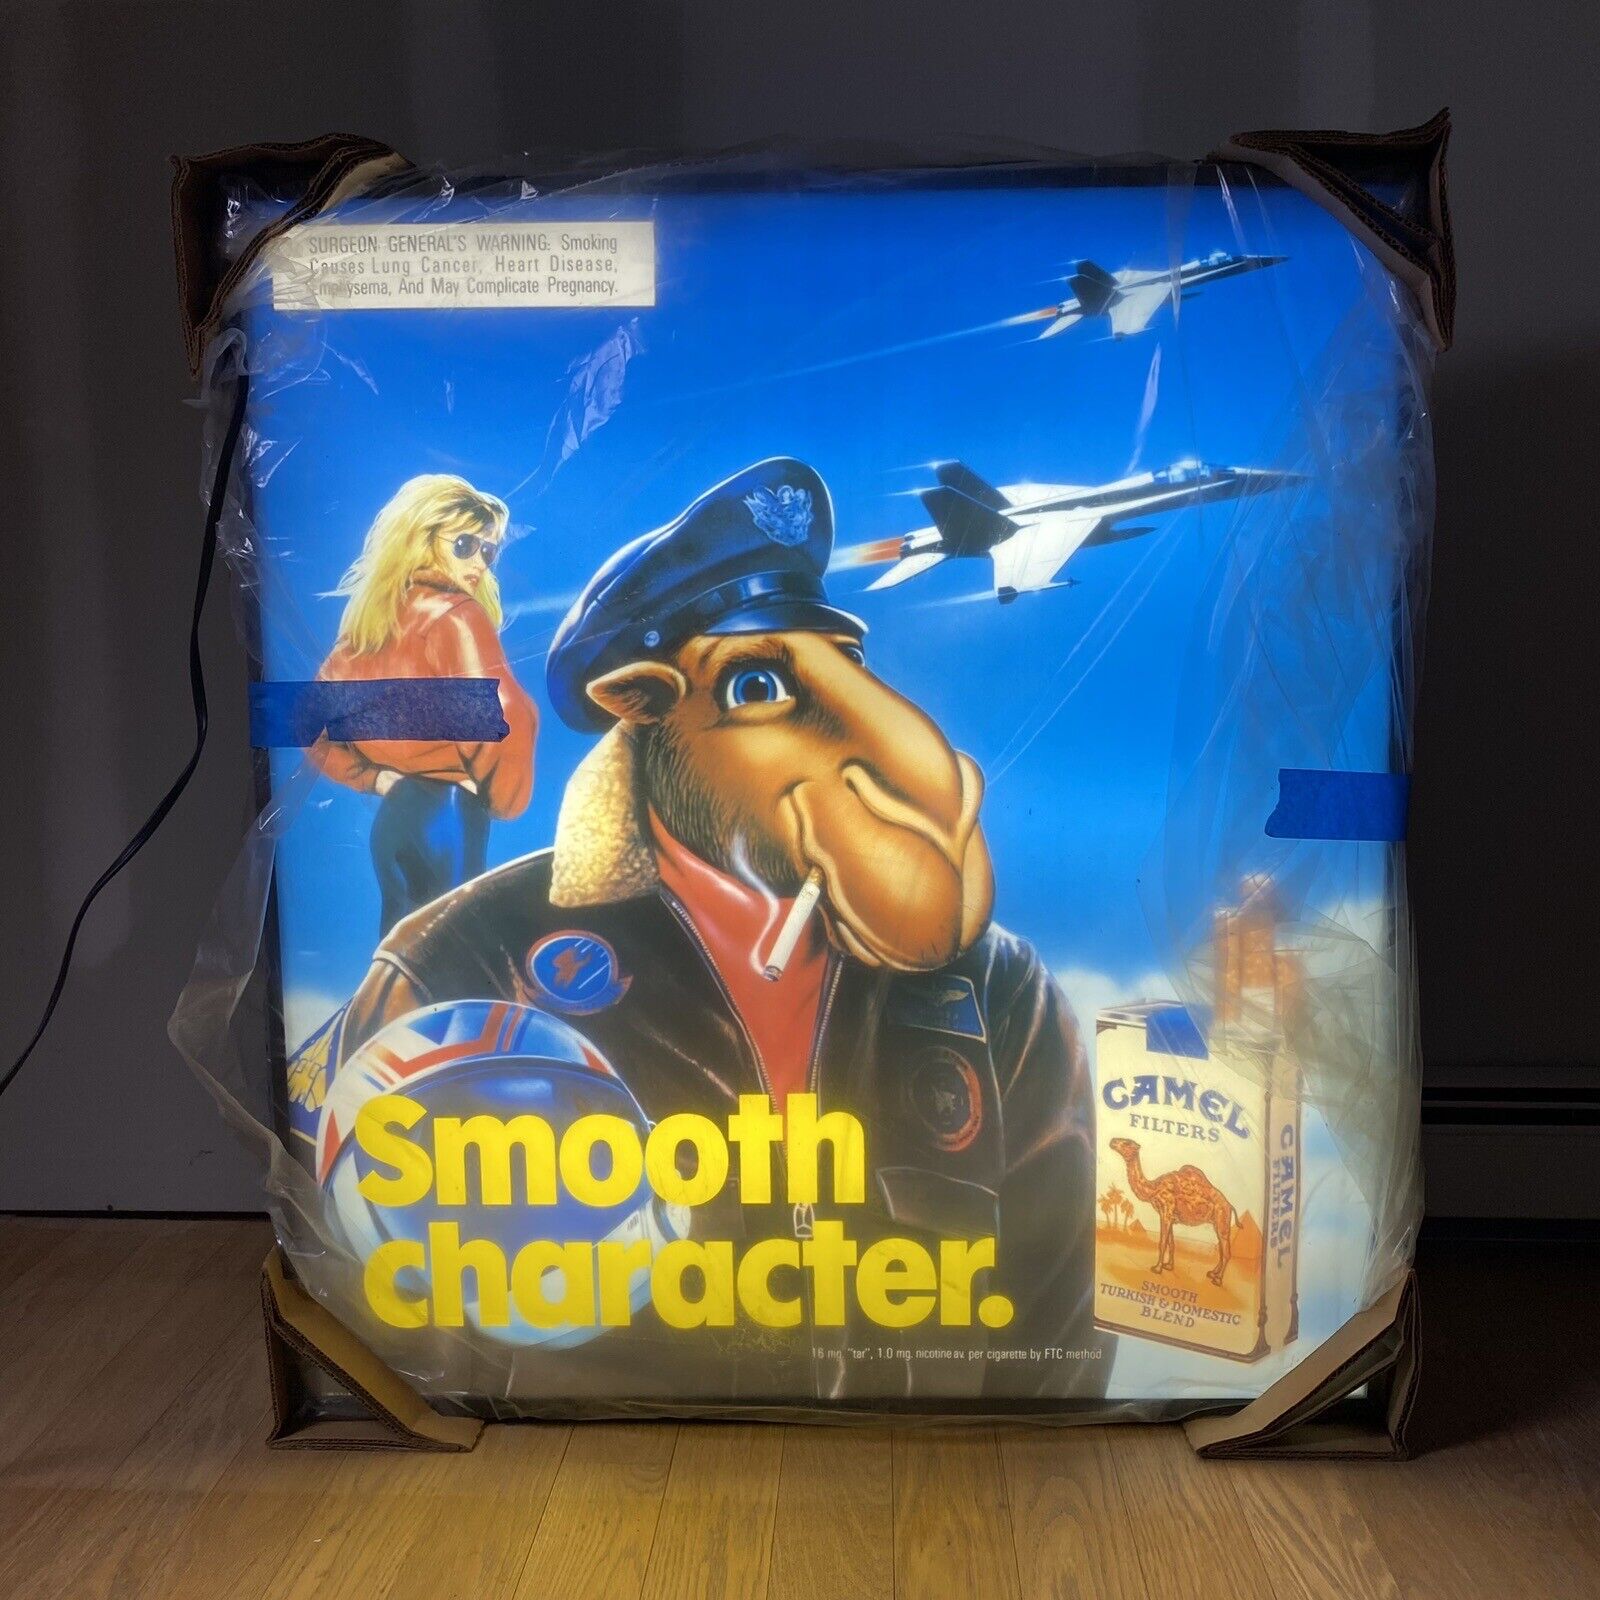 EXTREMELY RARE 1988 JOE CAMEL SMOOTH CHARACTER TOBACCO AVIATION LIGHTED SIGN NOS